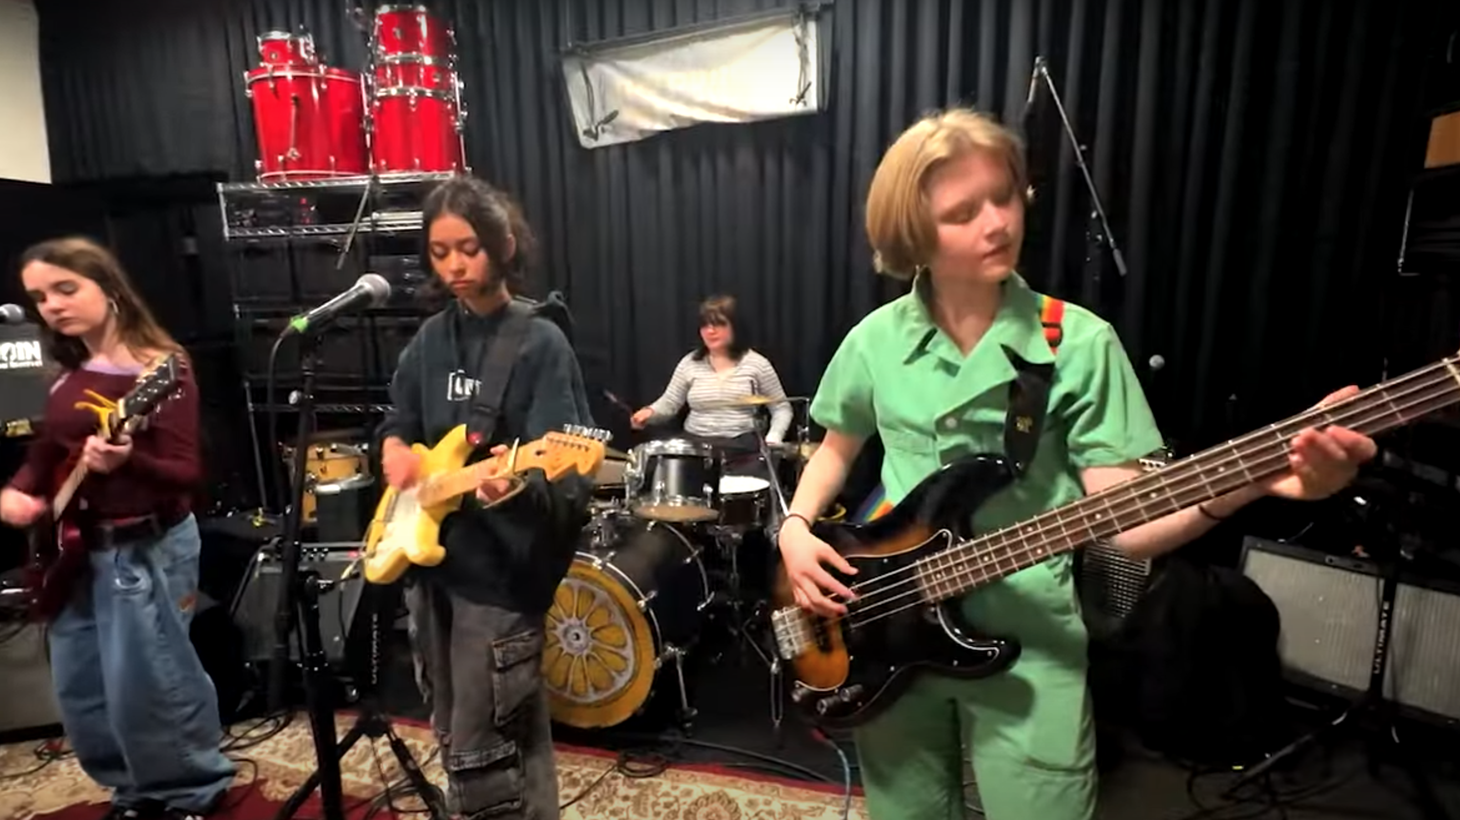 Meet The Lemonfrogs, one of KCRW's featured artists for the Young Creators Project.